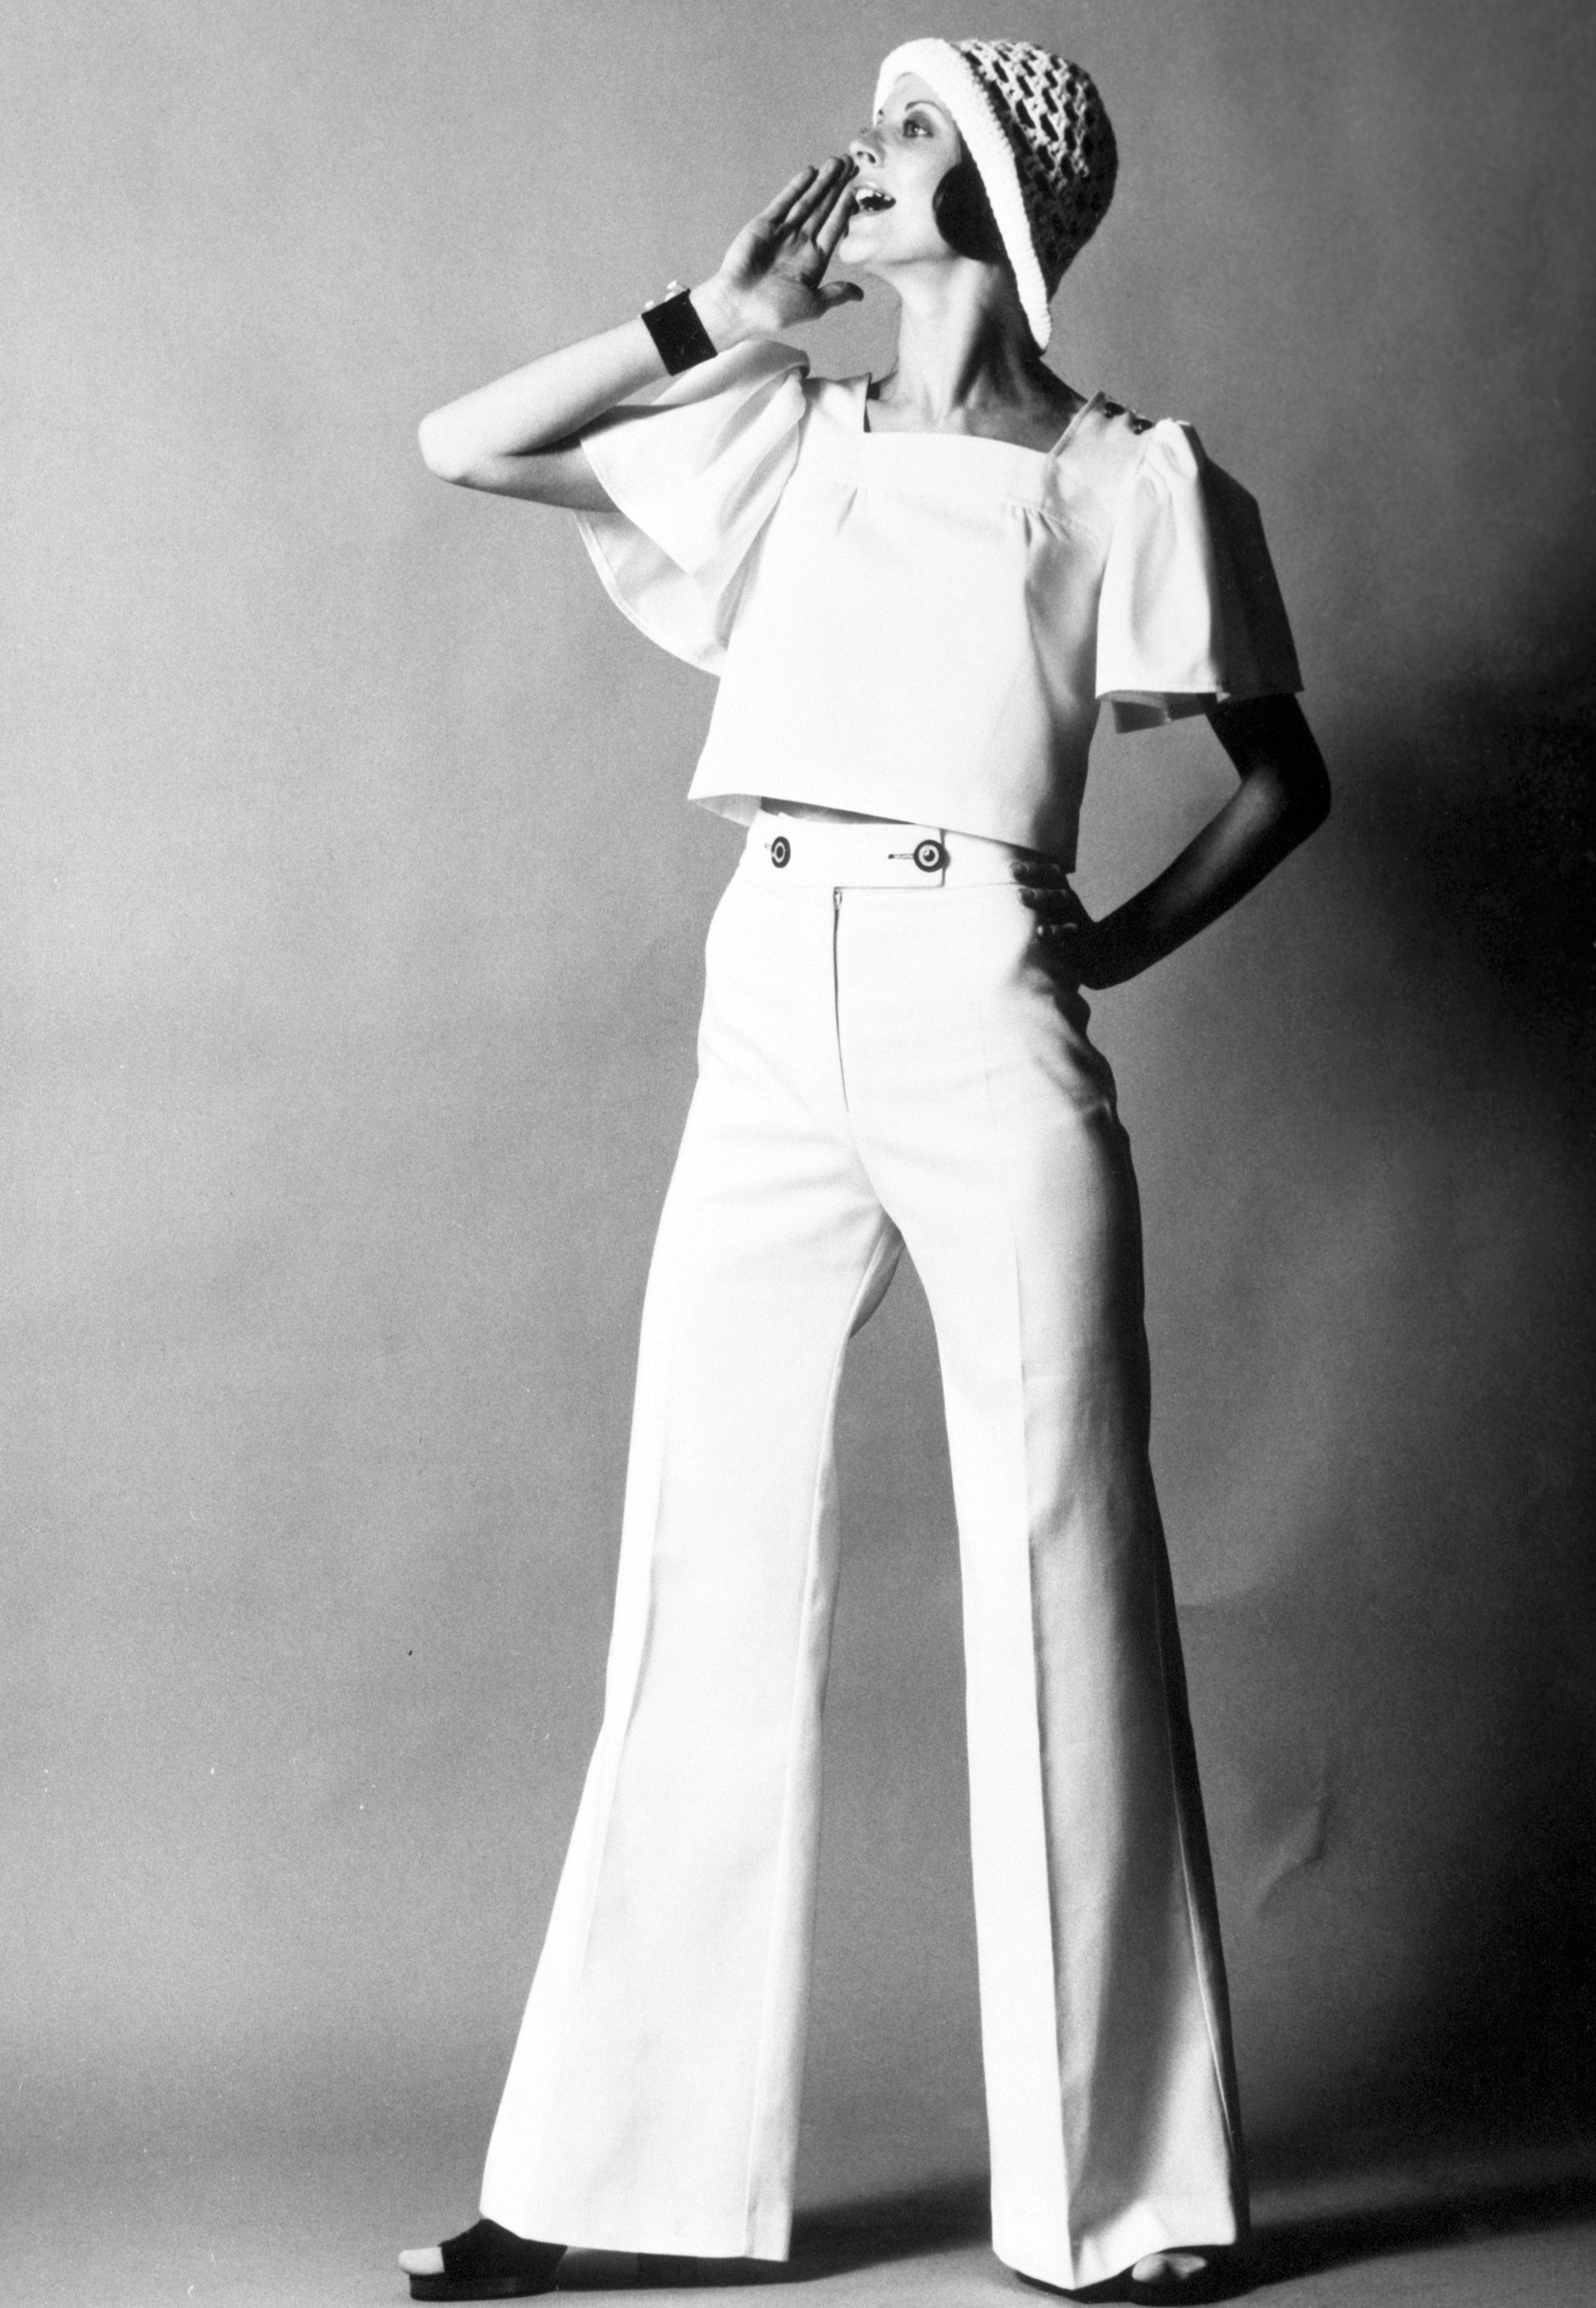 A model wears a sailor-inspired outfit from Mary Quant's 1972 spring/summer collection